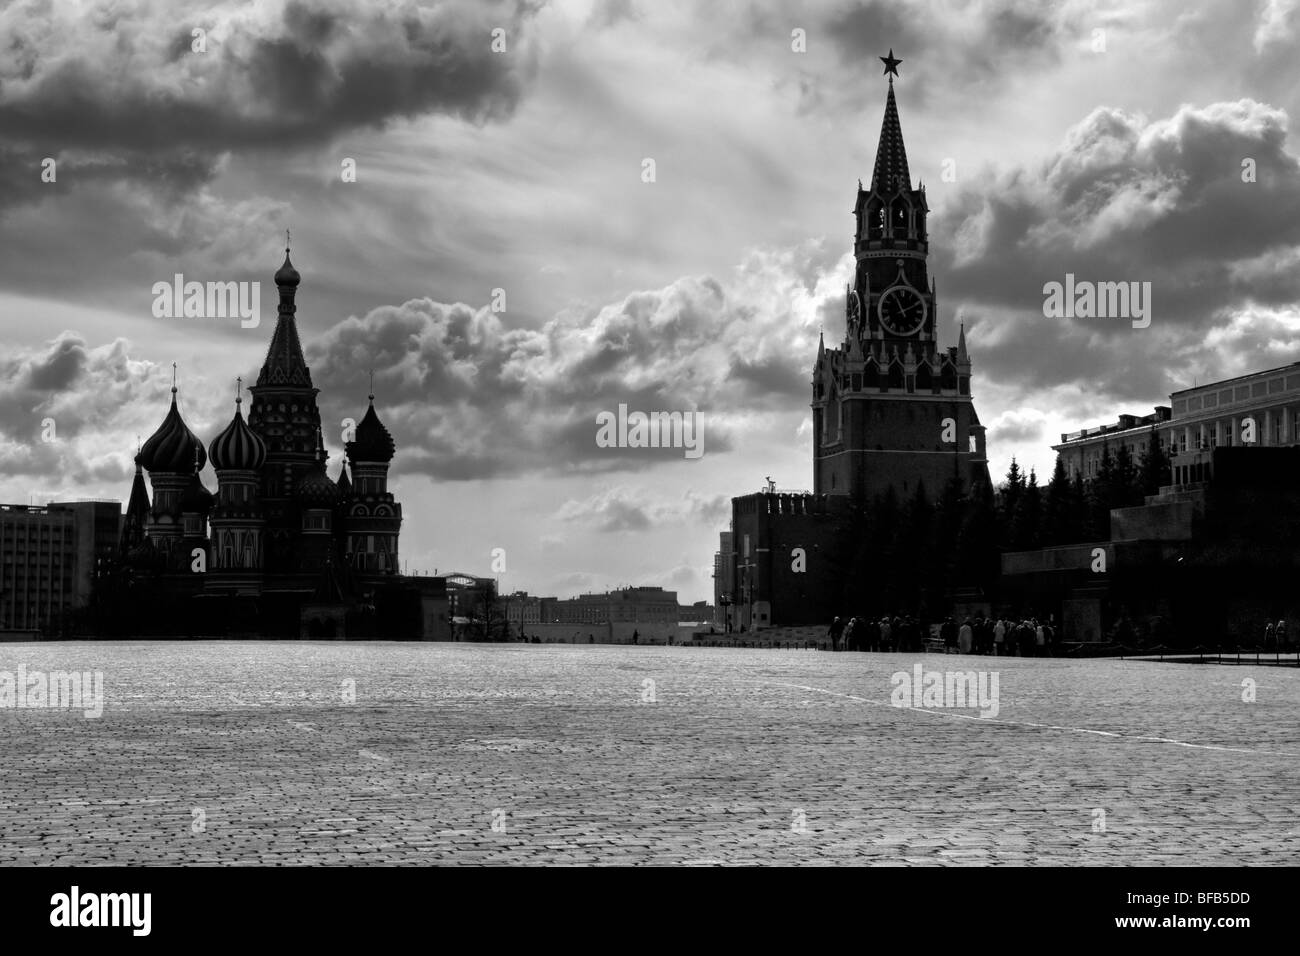 St Basil's Cathedral and Spasskiye Gate, Red Square, Moscow, Russia Stock Photo